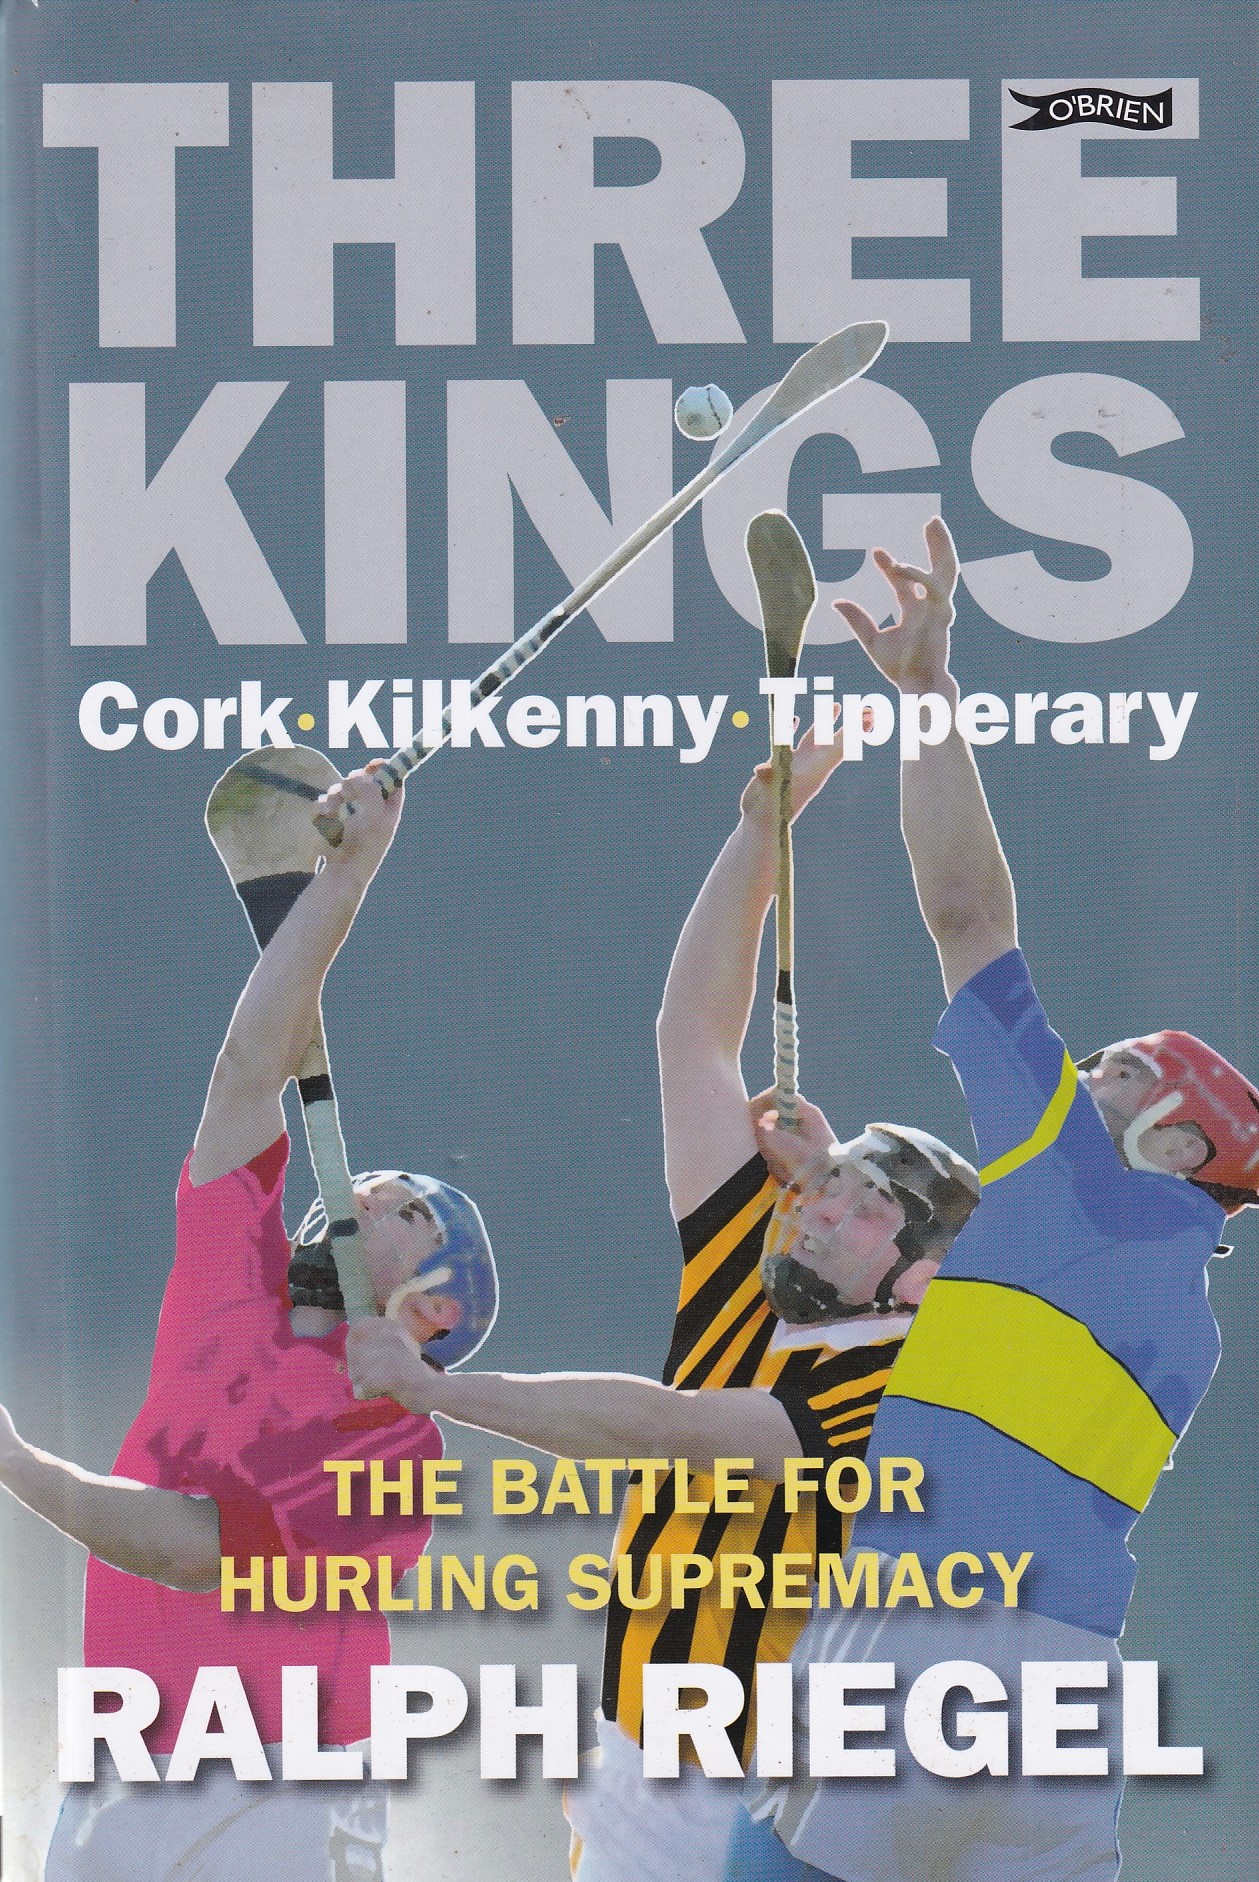 Three Kings: Cork Kilkenny Tipperary.The Battle for Hurling Supremacy by Riegel, Ralph